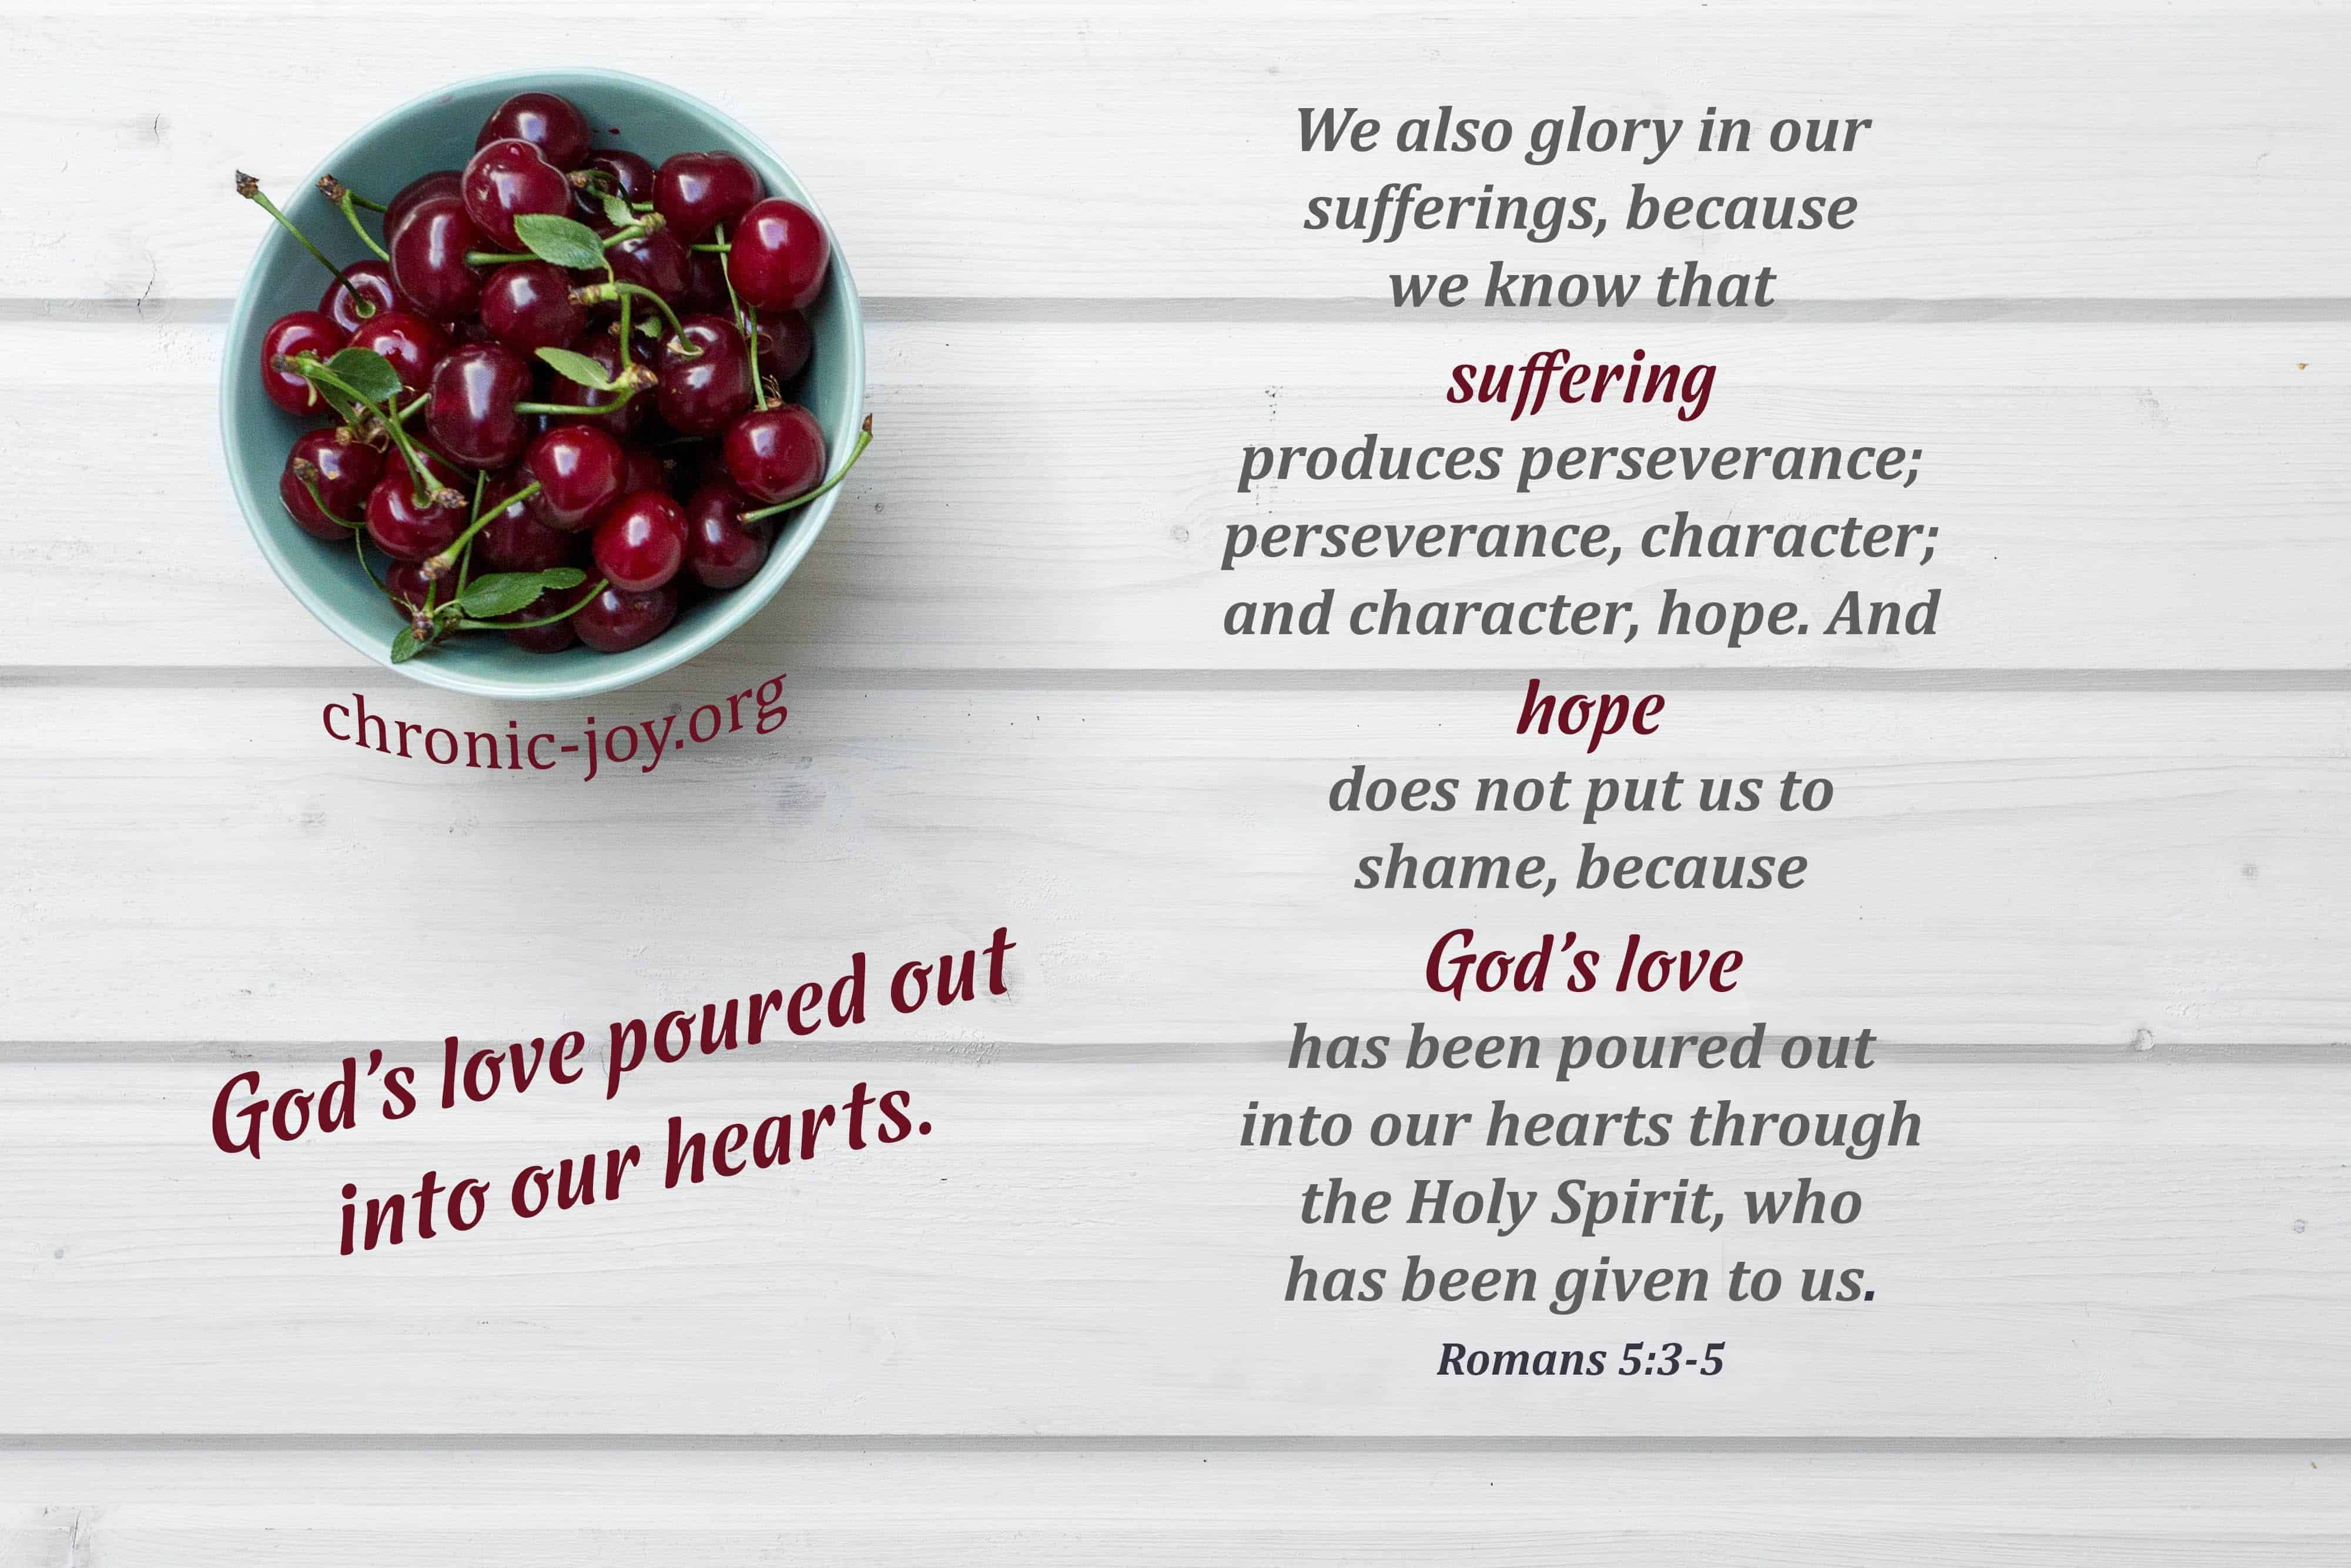 God's love poured out into our hearts.